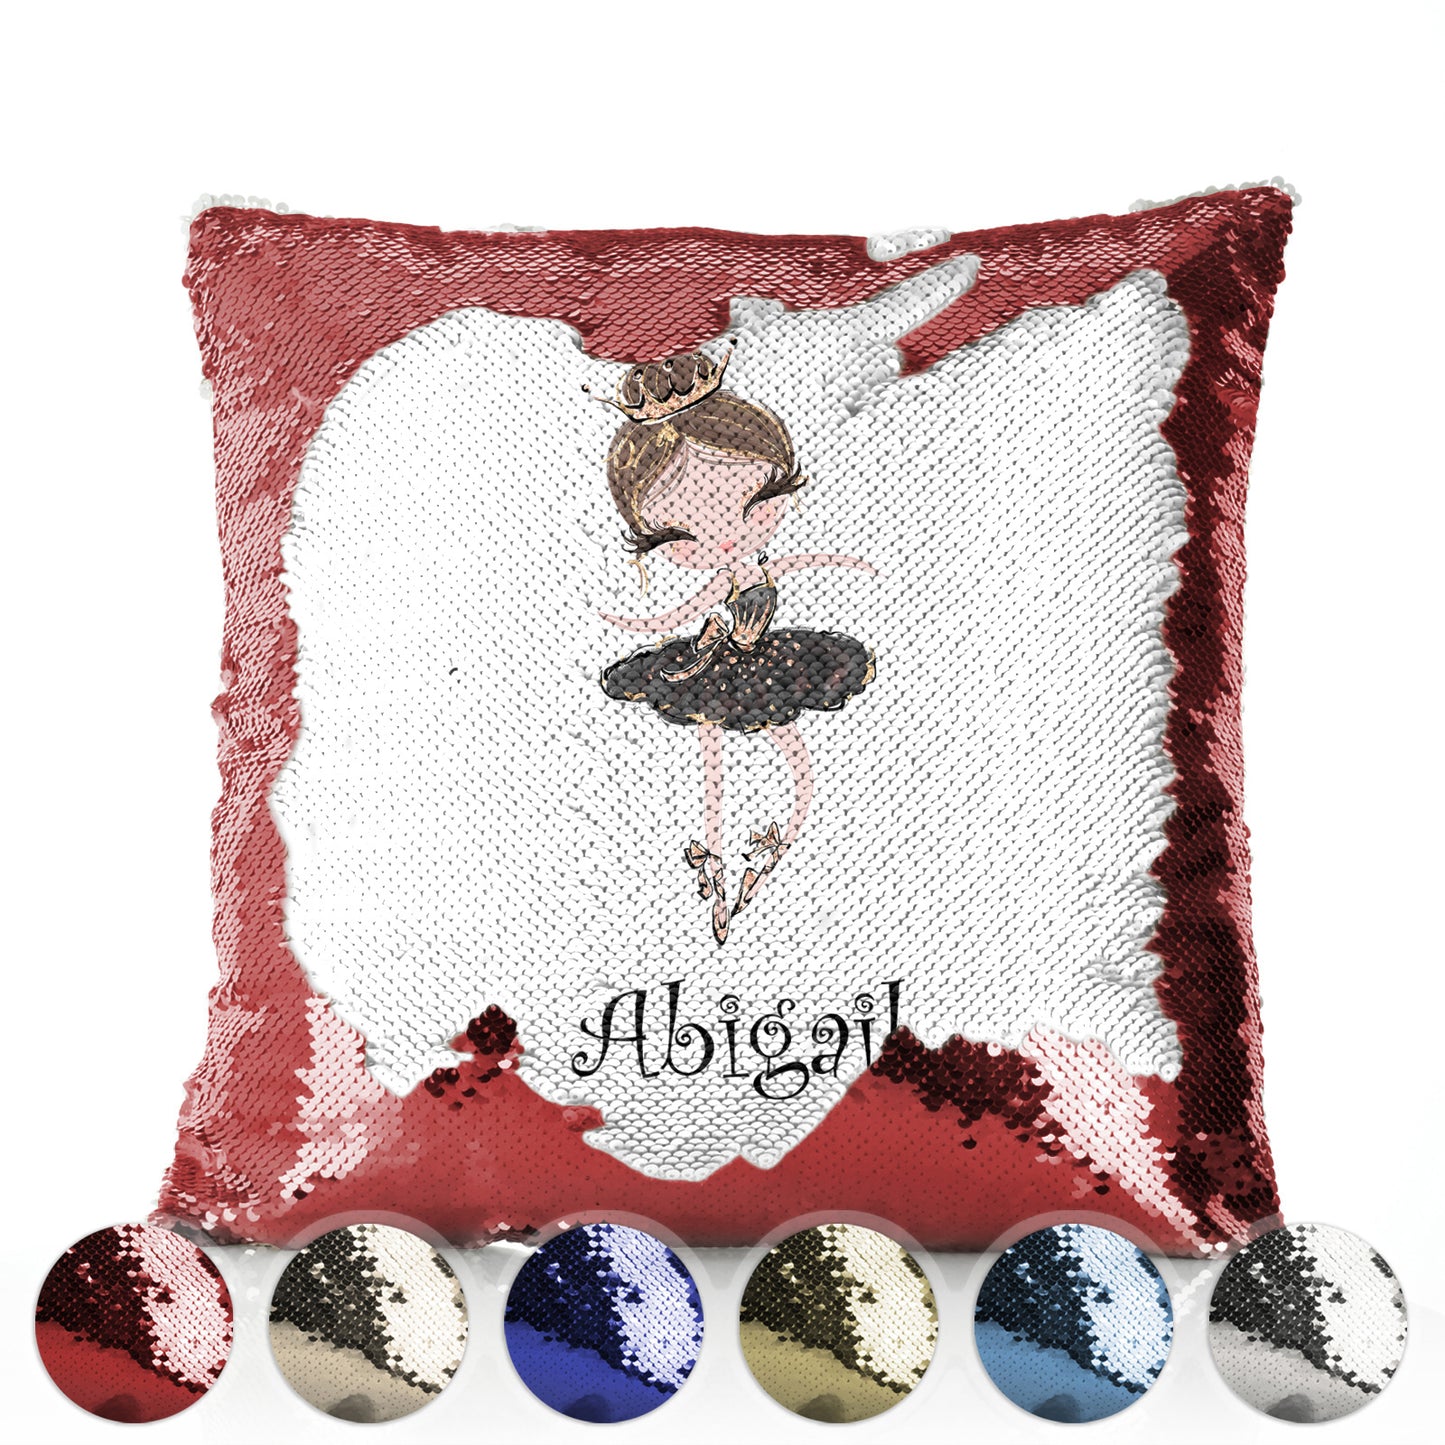 Personalised Sequin Cushion with Cute Text and Light Brown Hair Black Dress Tiara Ballerina